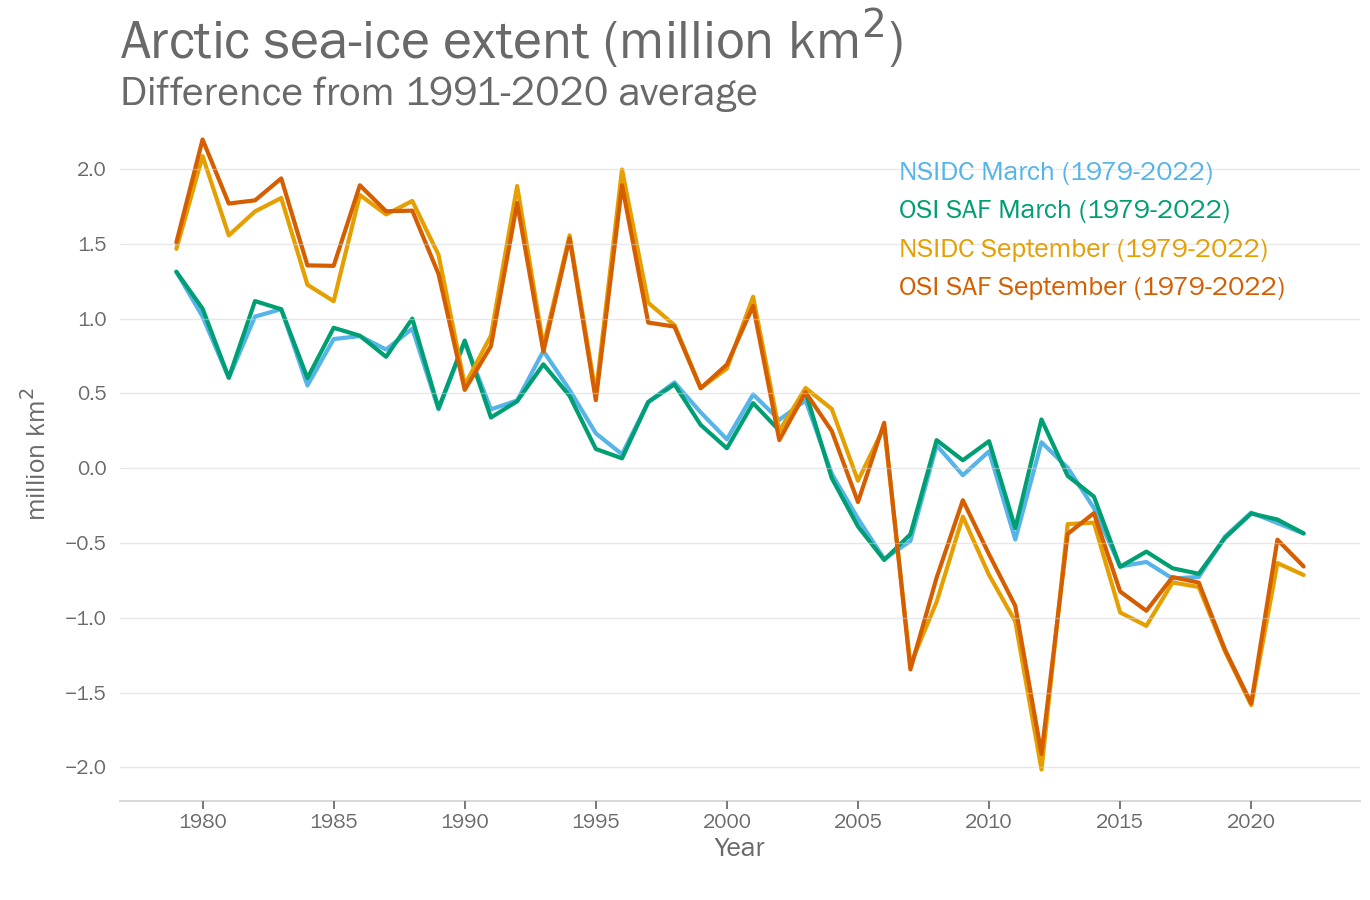 Arctic sea ice extent (shown as differences from the 1991-2020 average) from 1979 to 2022. Two months are shown - March and September - at the annual maximum and minimum extents respectively.